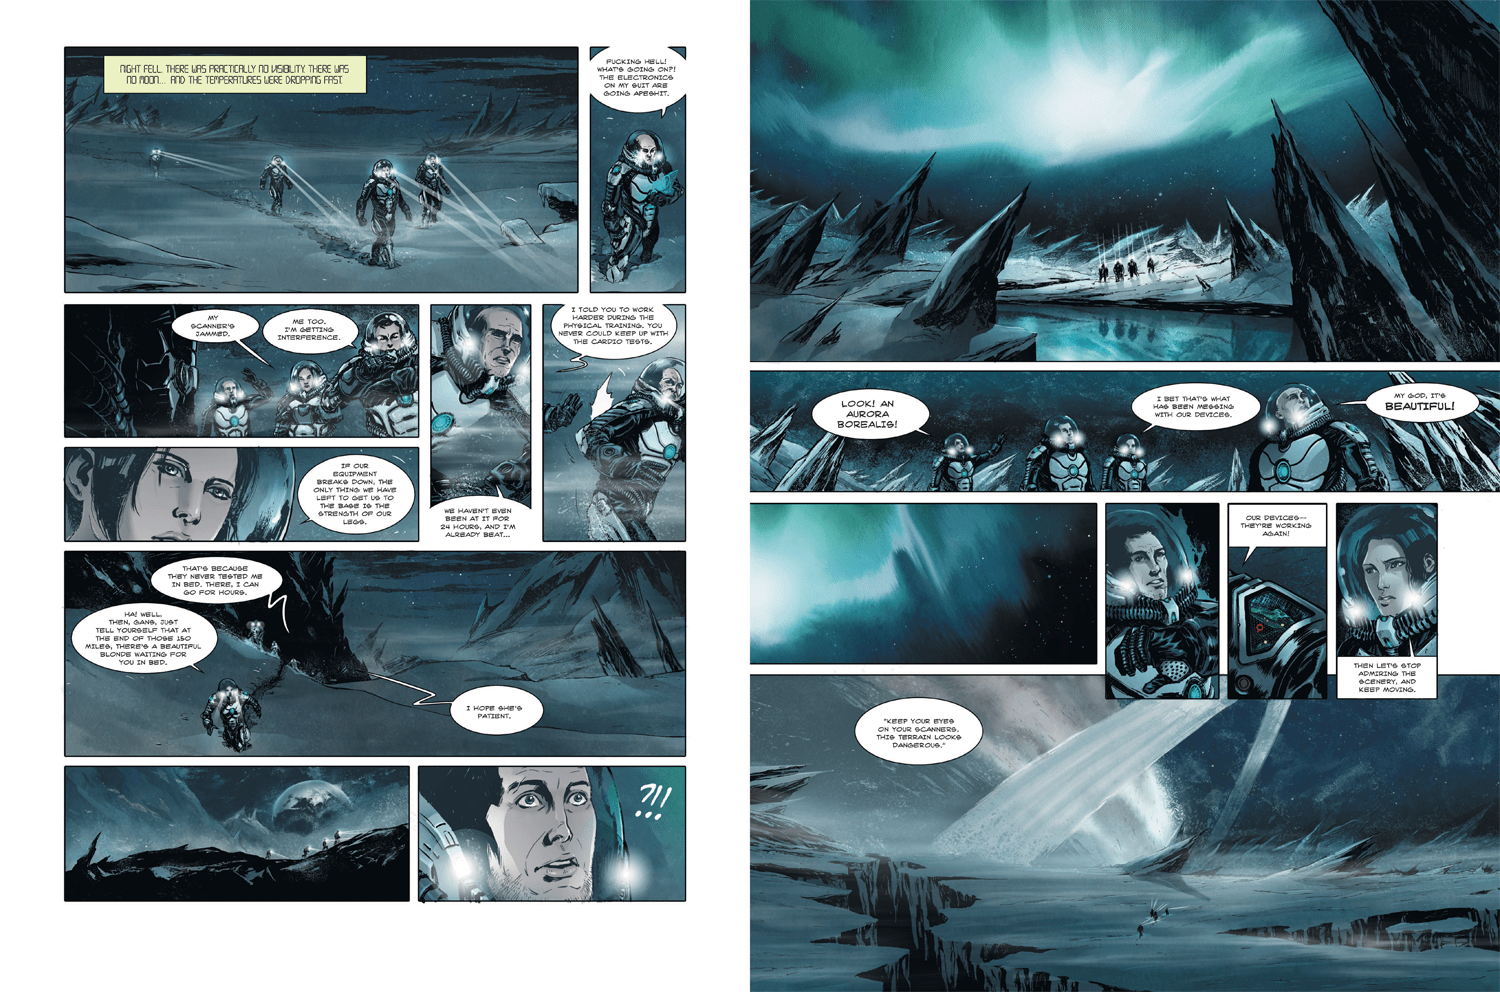 A Colonization Mission Goes Horribly Wrong In This First Look At The English Translation Of Siberia 56